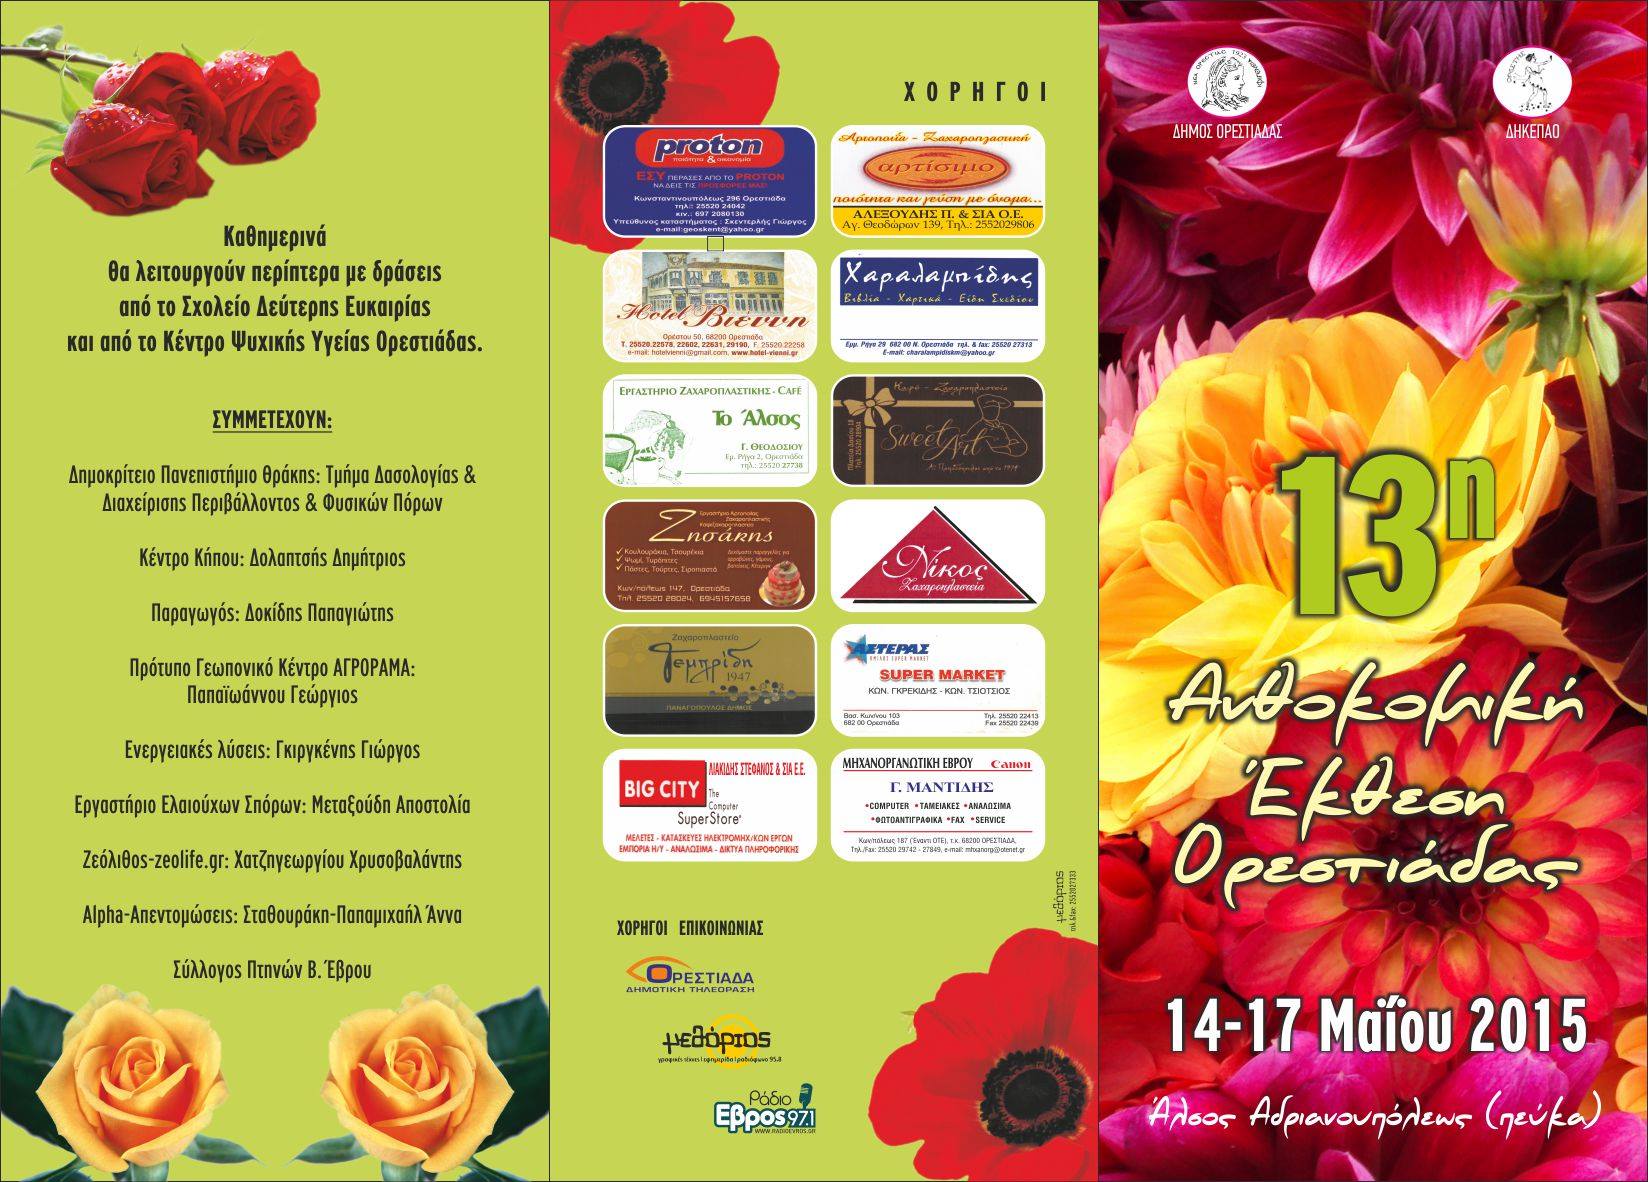 Zeolife.gr participates at the 13th Flower Exhibition in Nea Orestiada, 14 to 17 May, 2015